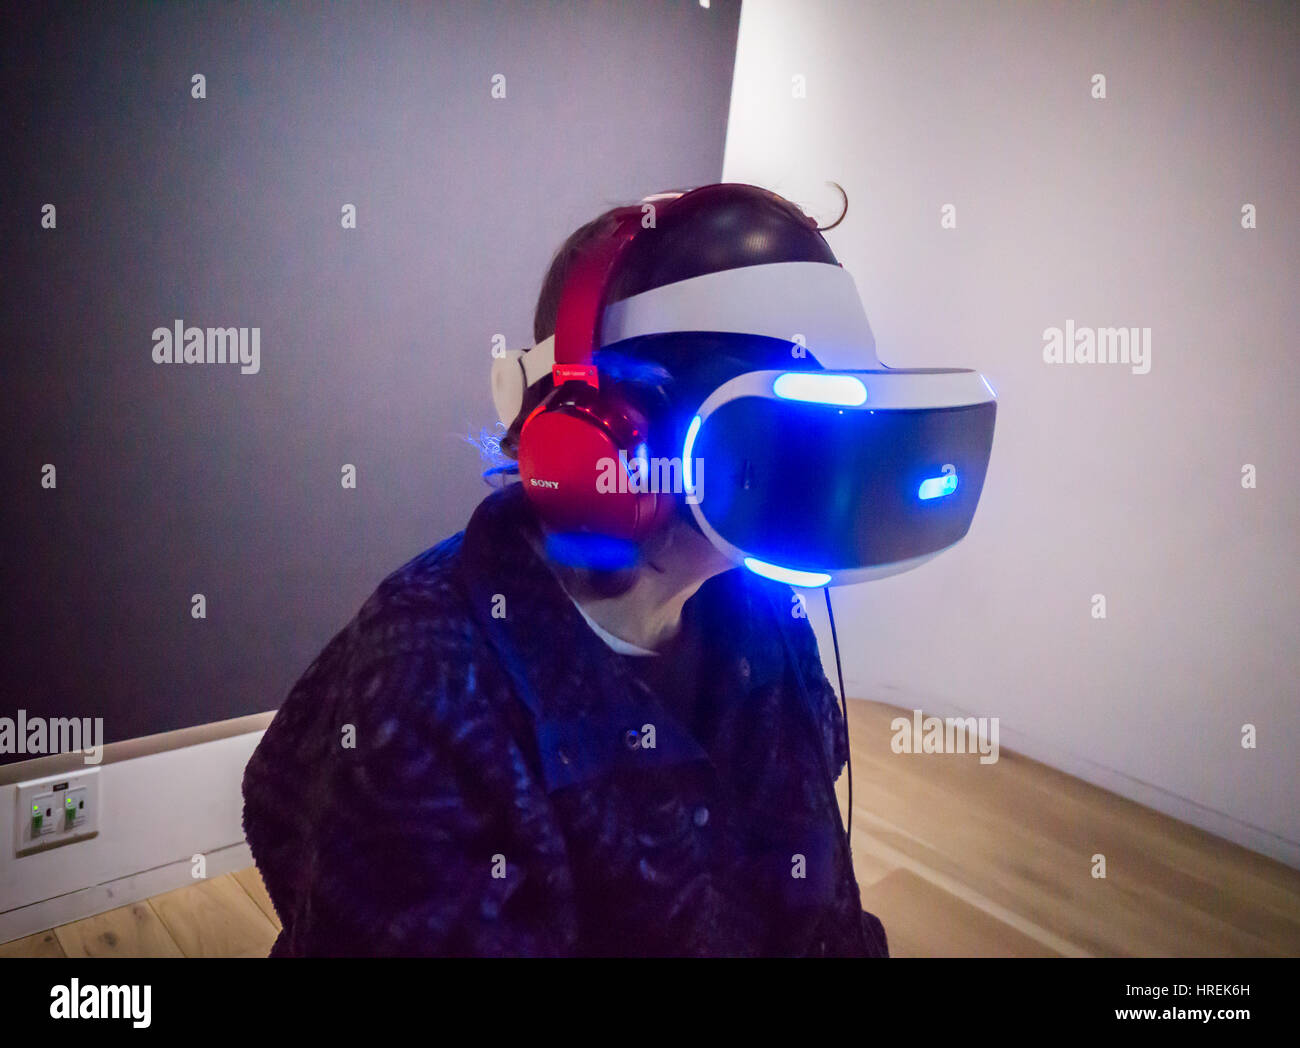 A visitor to Sony Square in New York on Monday, February 27, 2017 tries out the Sony Playstation VR virtual reality headset. The headset, an add-on to existing Playstation 4 consoles, has been very popular due to the existing market of Playstation owners. (© Richard B. Levine) Stock Photo